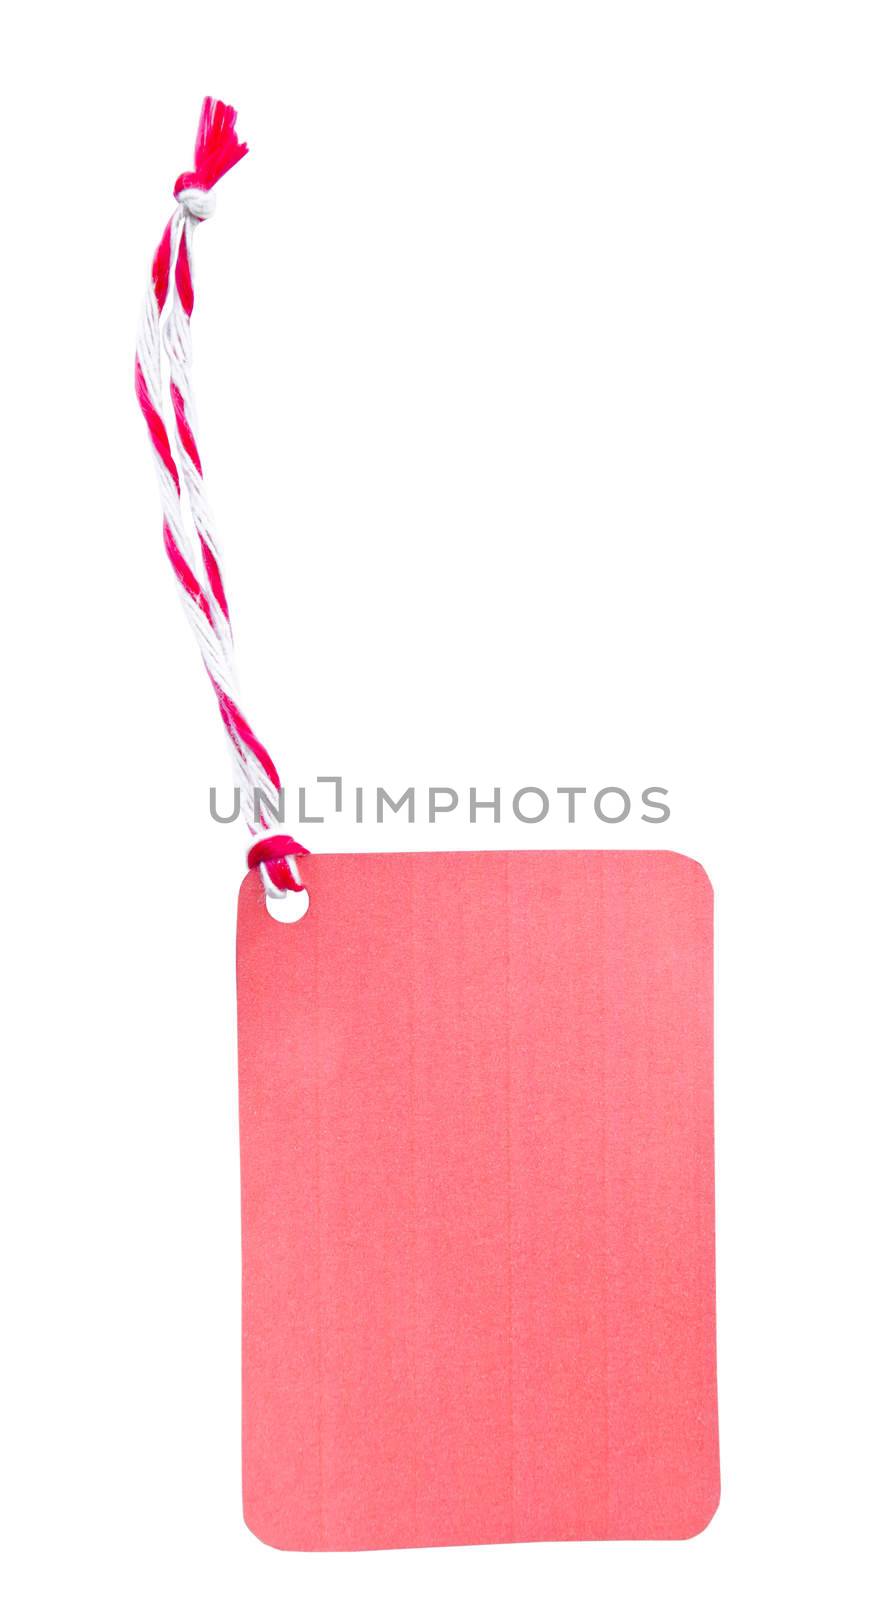 Blank tag isolated on white background, clipping path